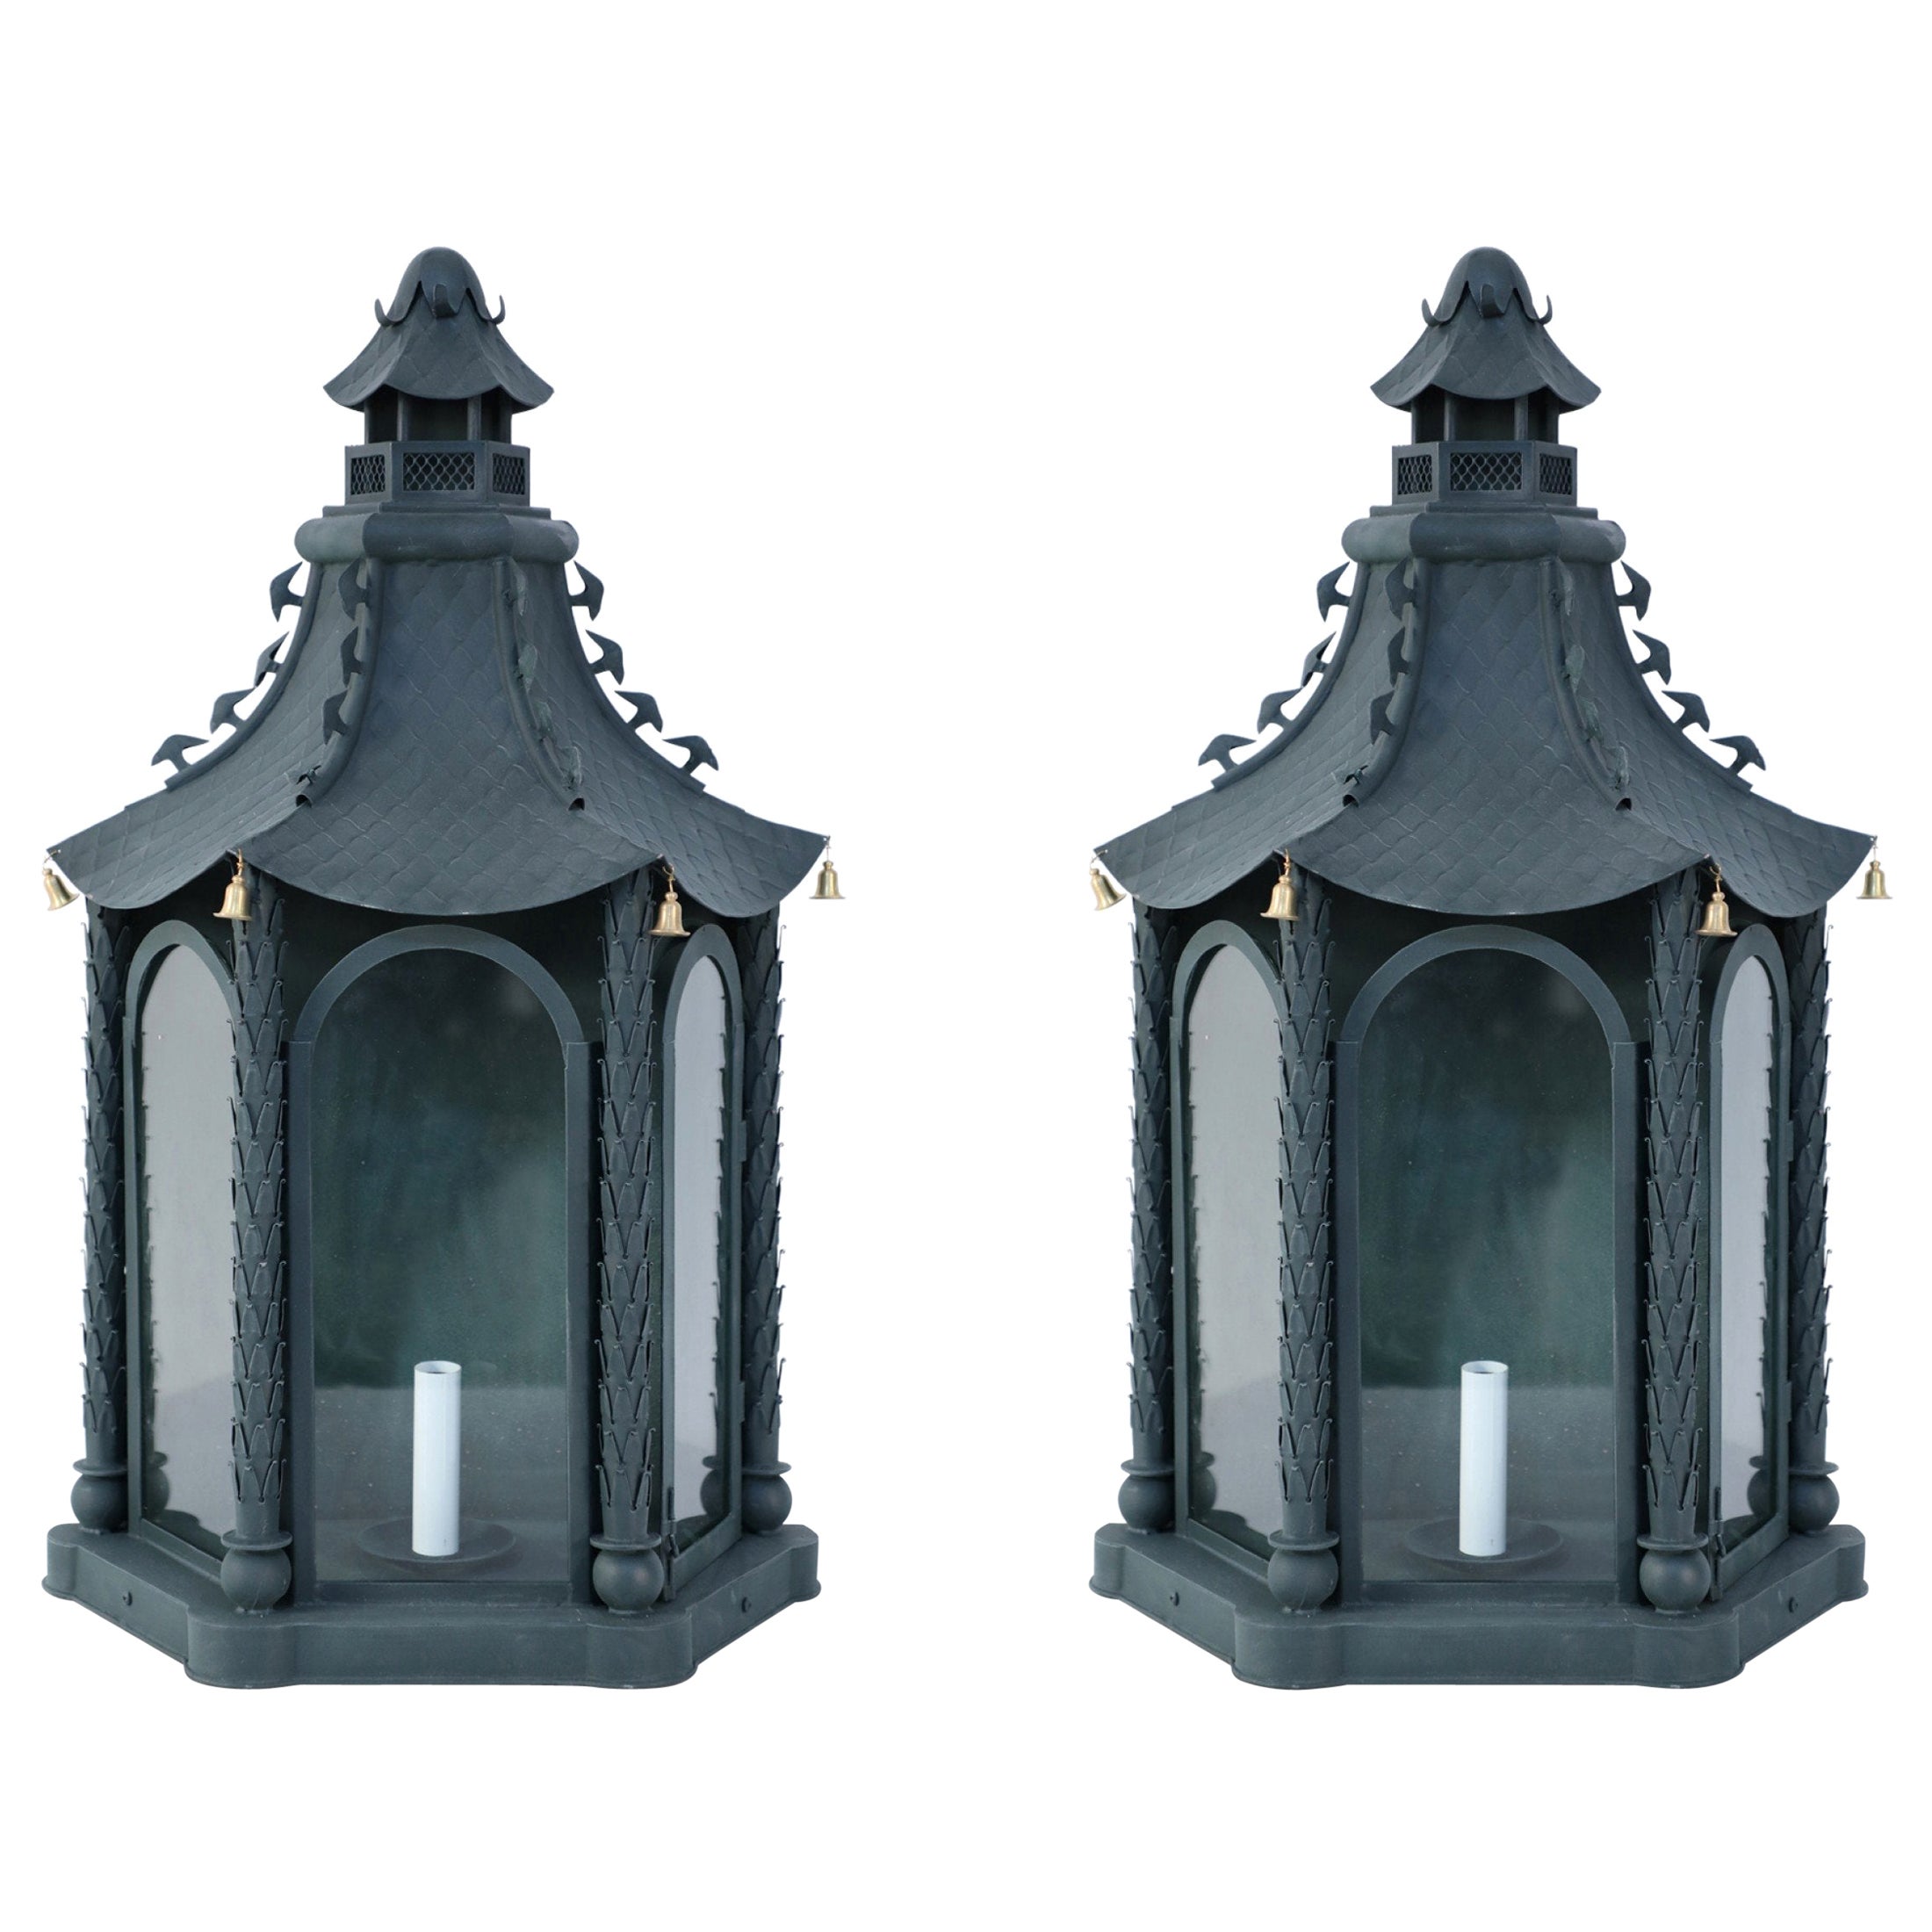 Pair of Vintage Chinese Metal and Glass Bell-Adorned Pagoda Shaped Wall Sconces